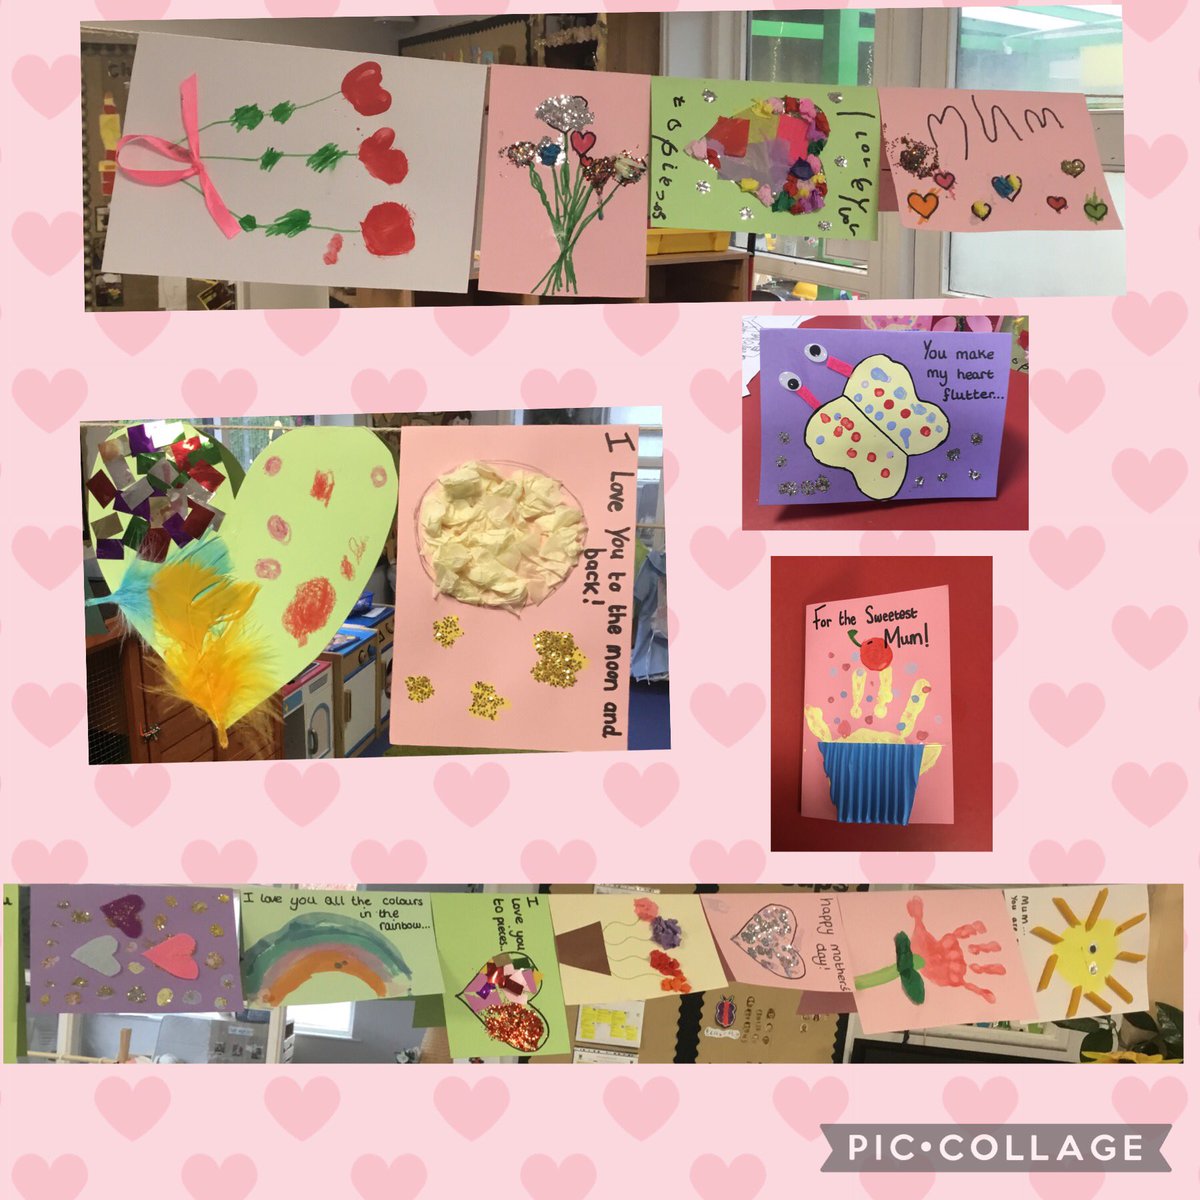 ‘Let your art be as unique as you’ 👩🏼‍🎨 Meithrin have enjoyed creating cards for someone they love! They chose their own design, tools, colours, materials and paper. ❤️ Prydferth! 😍 #expressivearts #enterprisingcreativecontributors @garntegprimary @MissDalton98 @Miss_Mitchell20